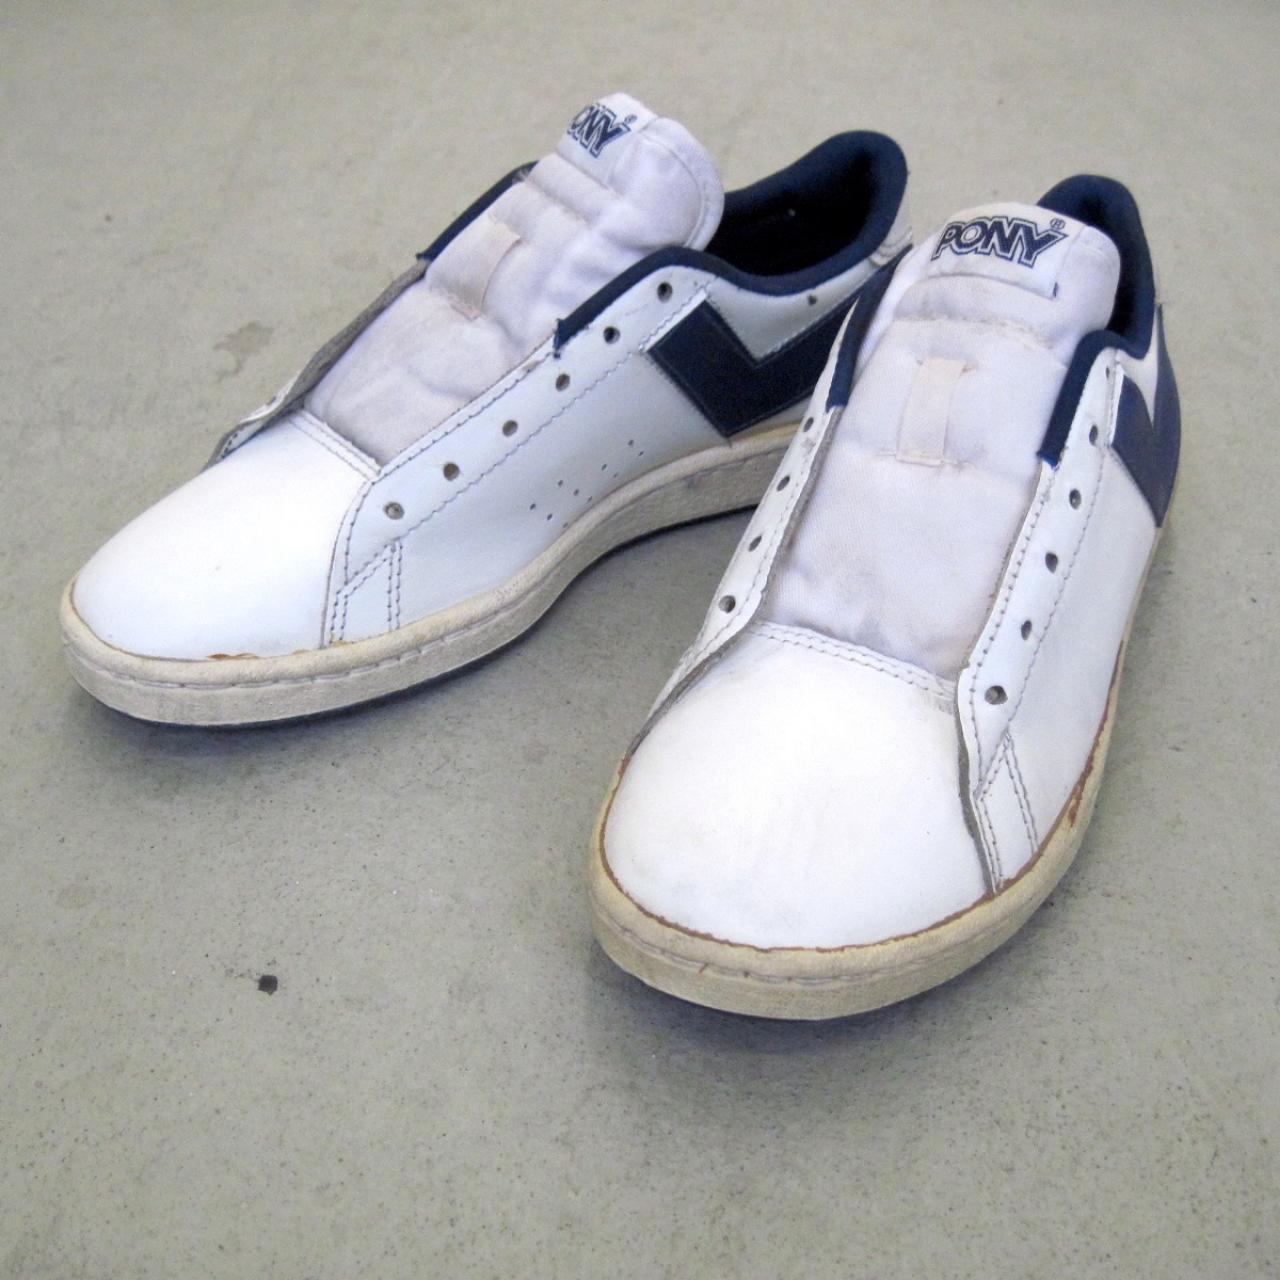 Pony Men's White and Navy Trainers (4)